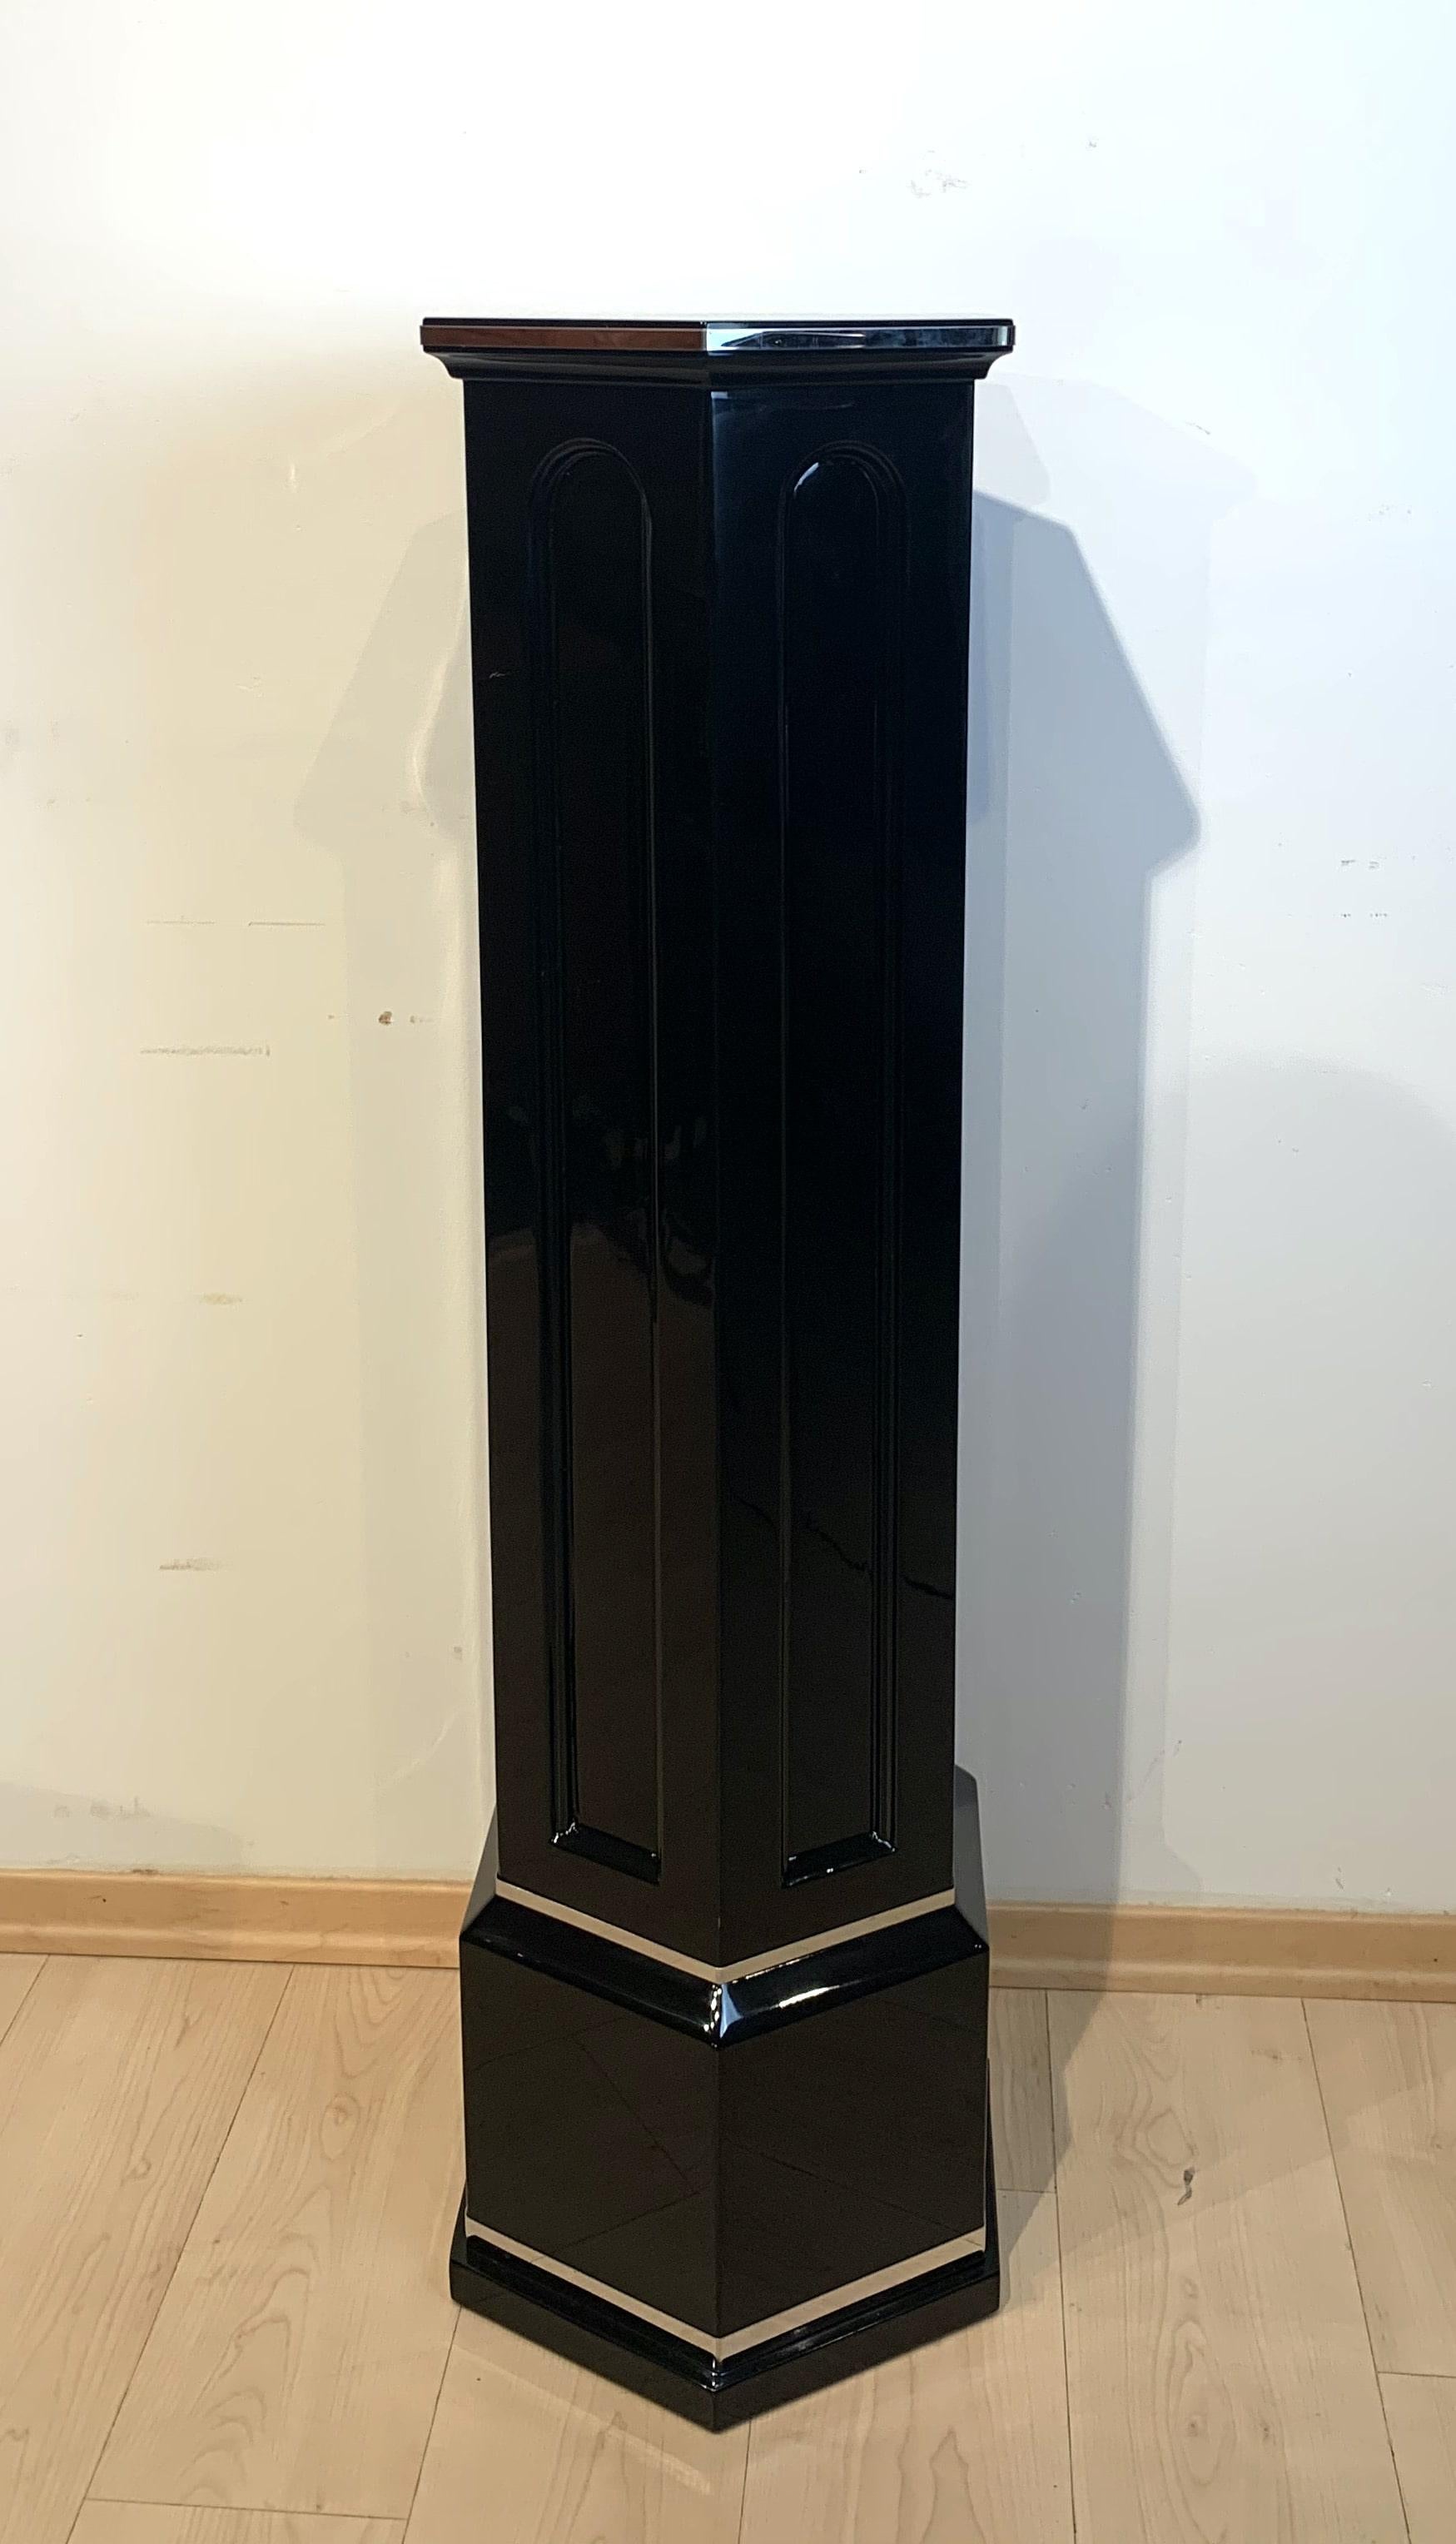 Art Deco column or pedestal, hexagonal, black lacquer on oak, France, circa 1930.

Heavy hexagonal Art Deco Column or Pedestal from France, circa 1930.
Solid oak, black high gloss lacquered. Arch inclusions on the sides. Surrounding decorative